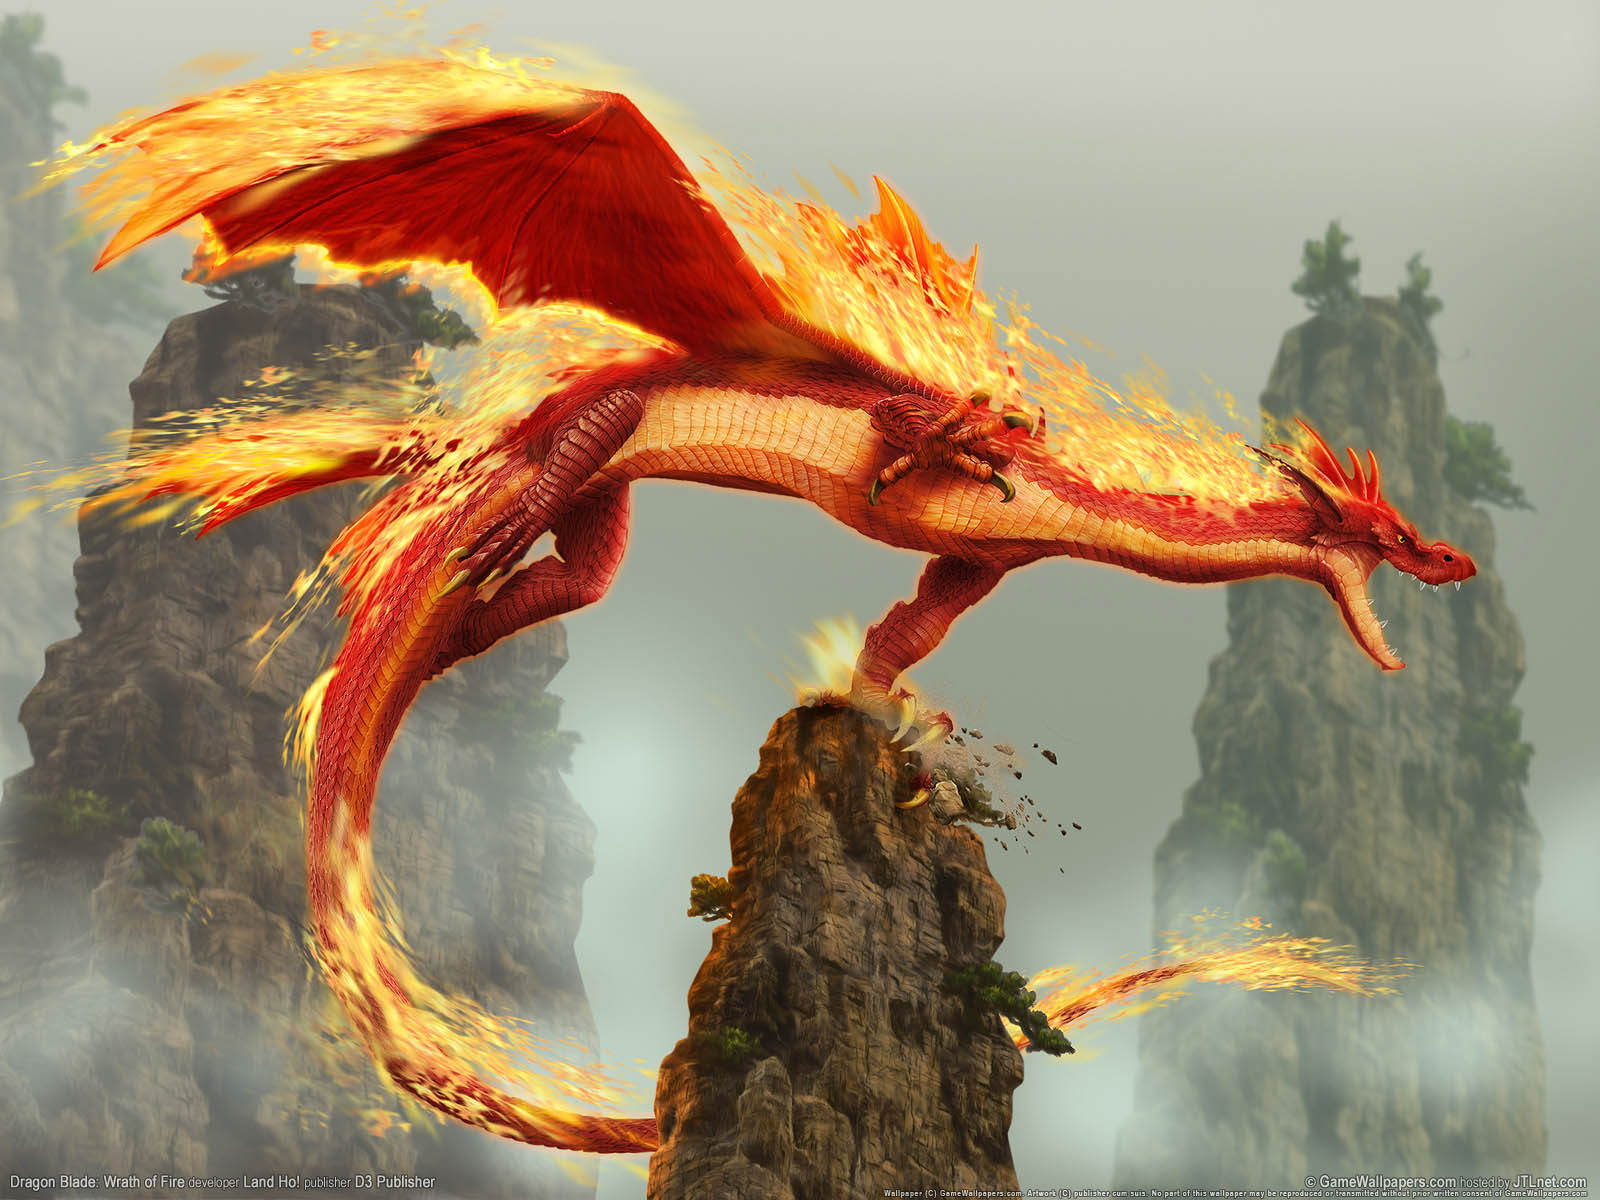 Dragon Blade%3A Wrath of Fire achtergrond 01 1600x1200